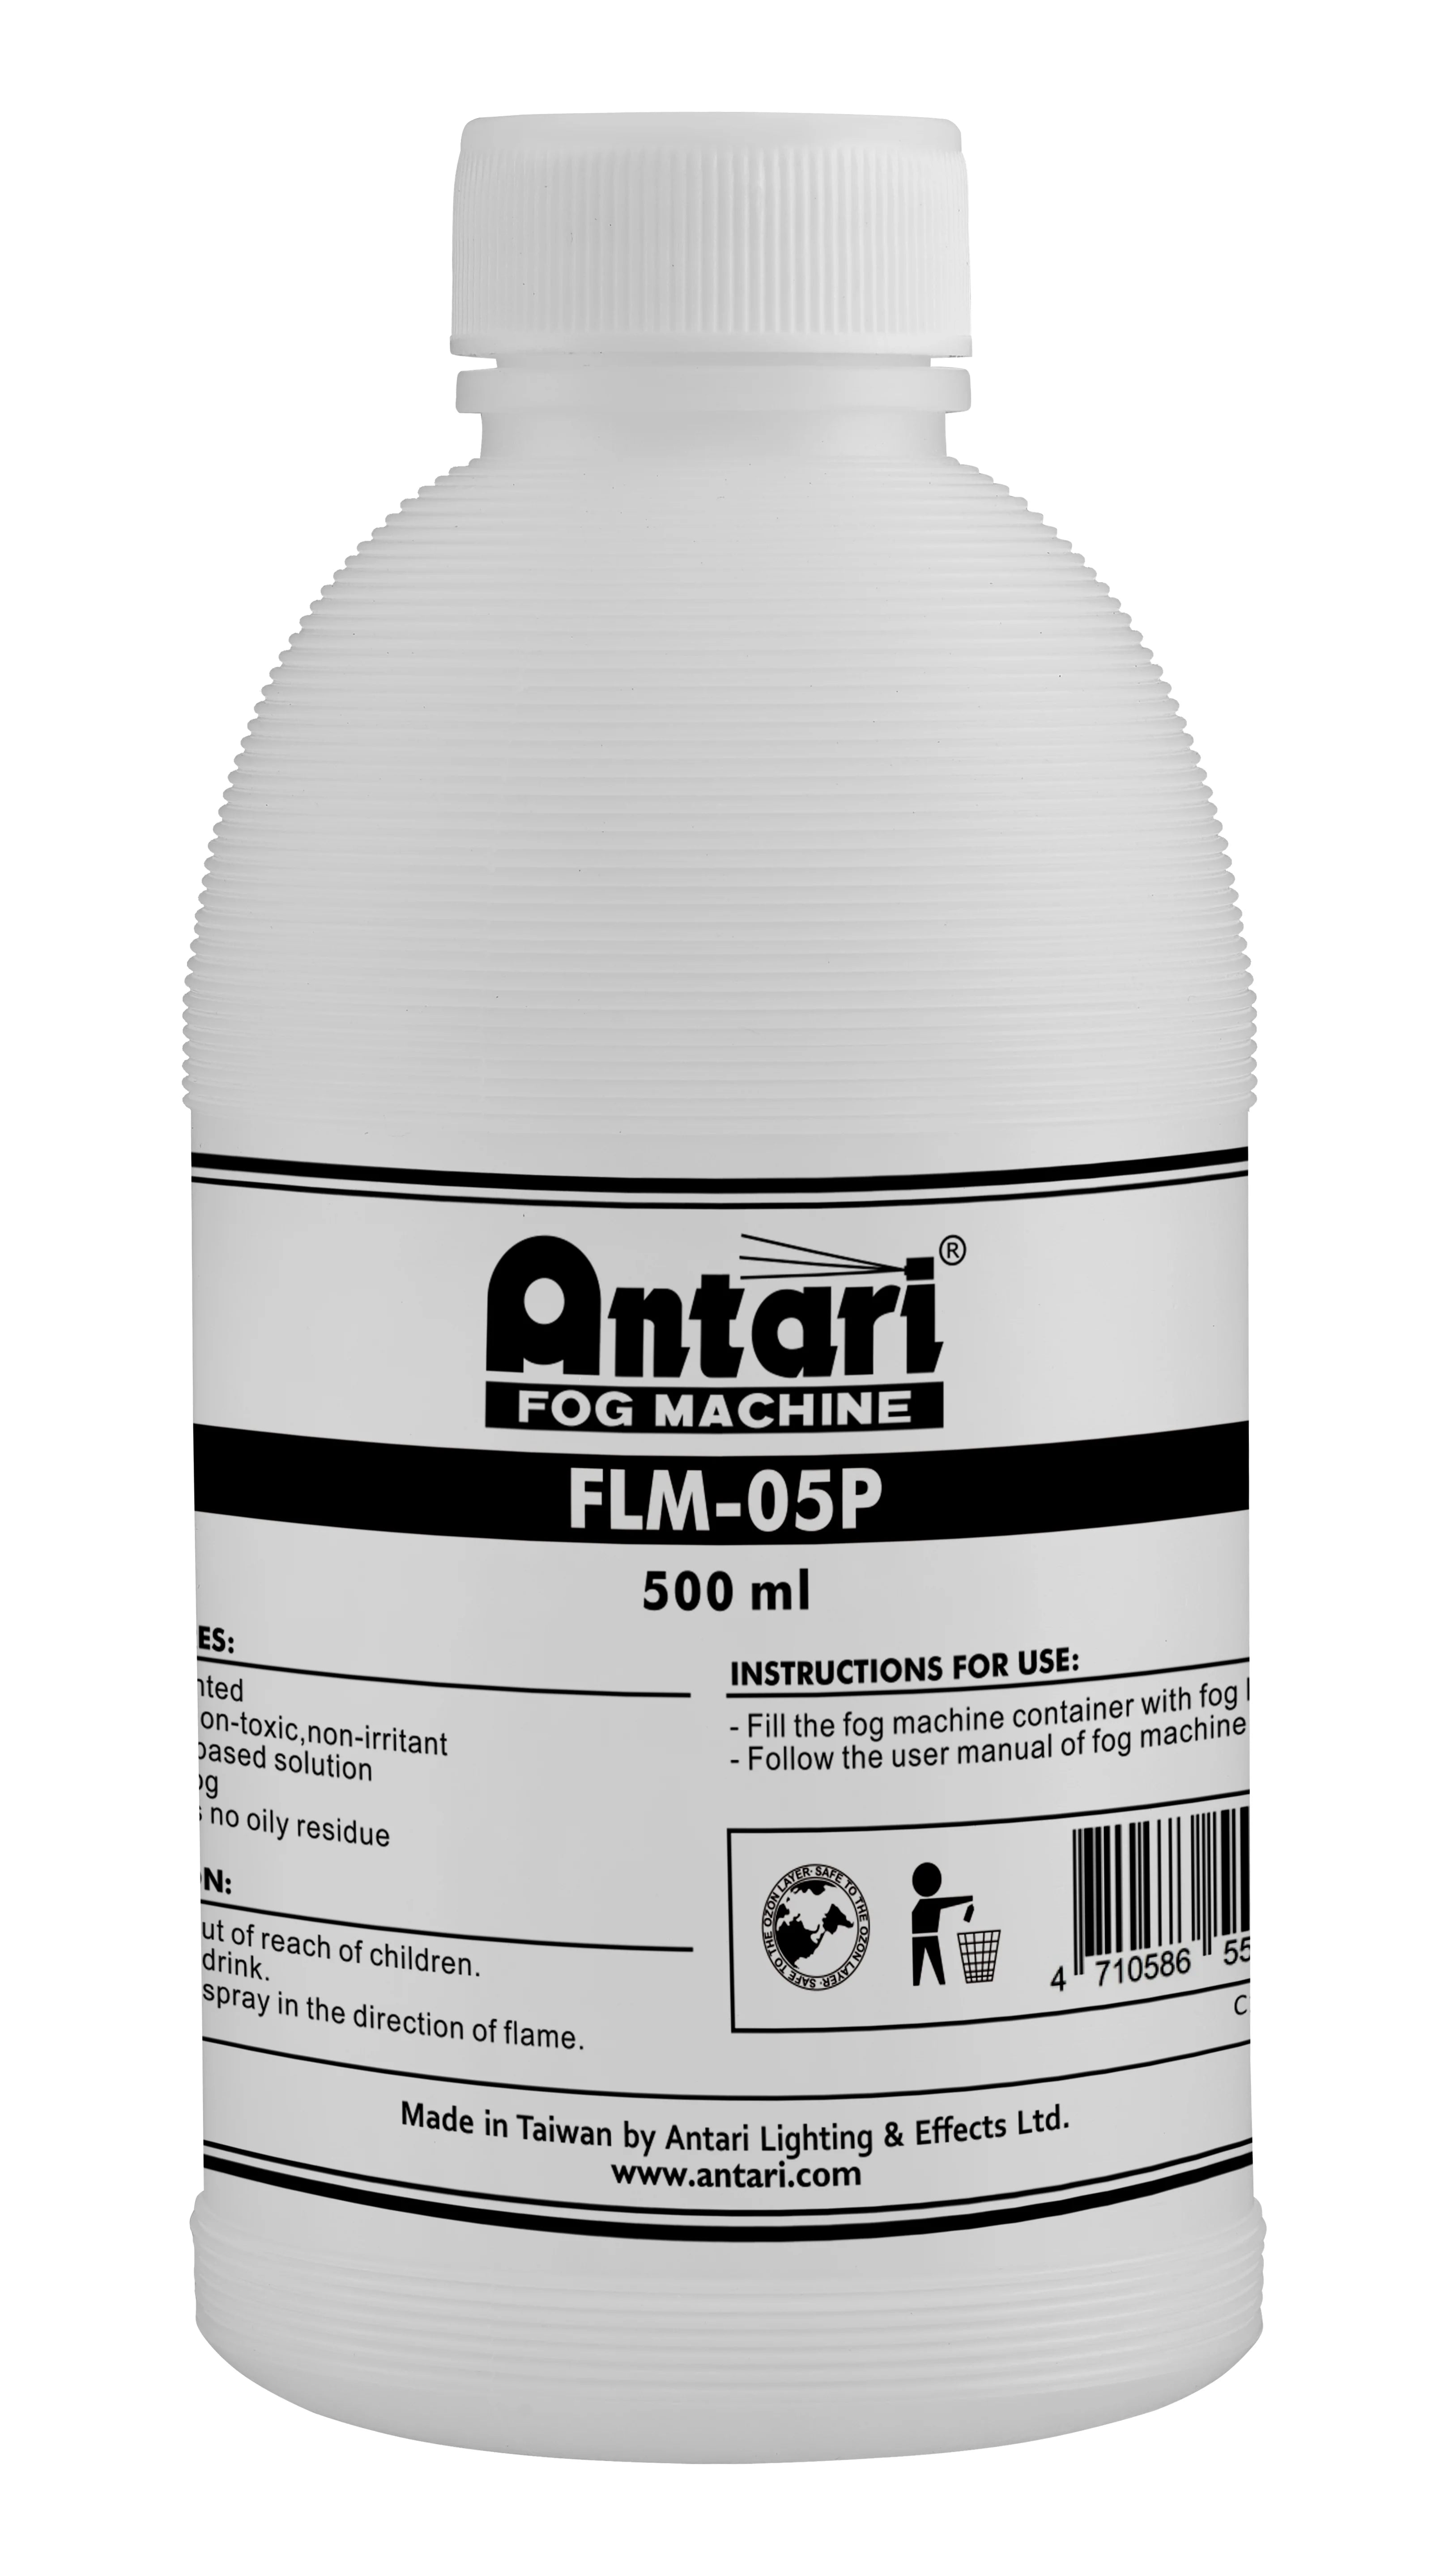 Antari FLM-05P 500mls Liquid included with the FT20X kit